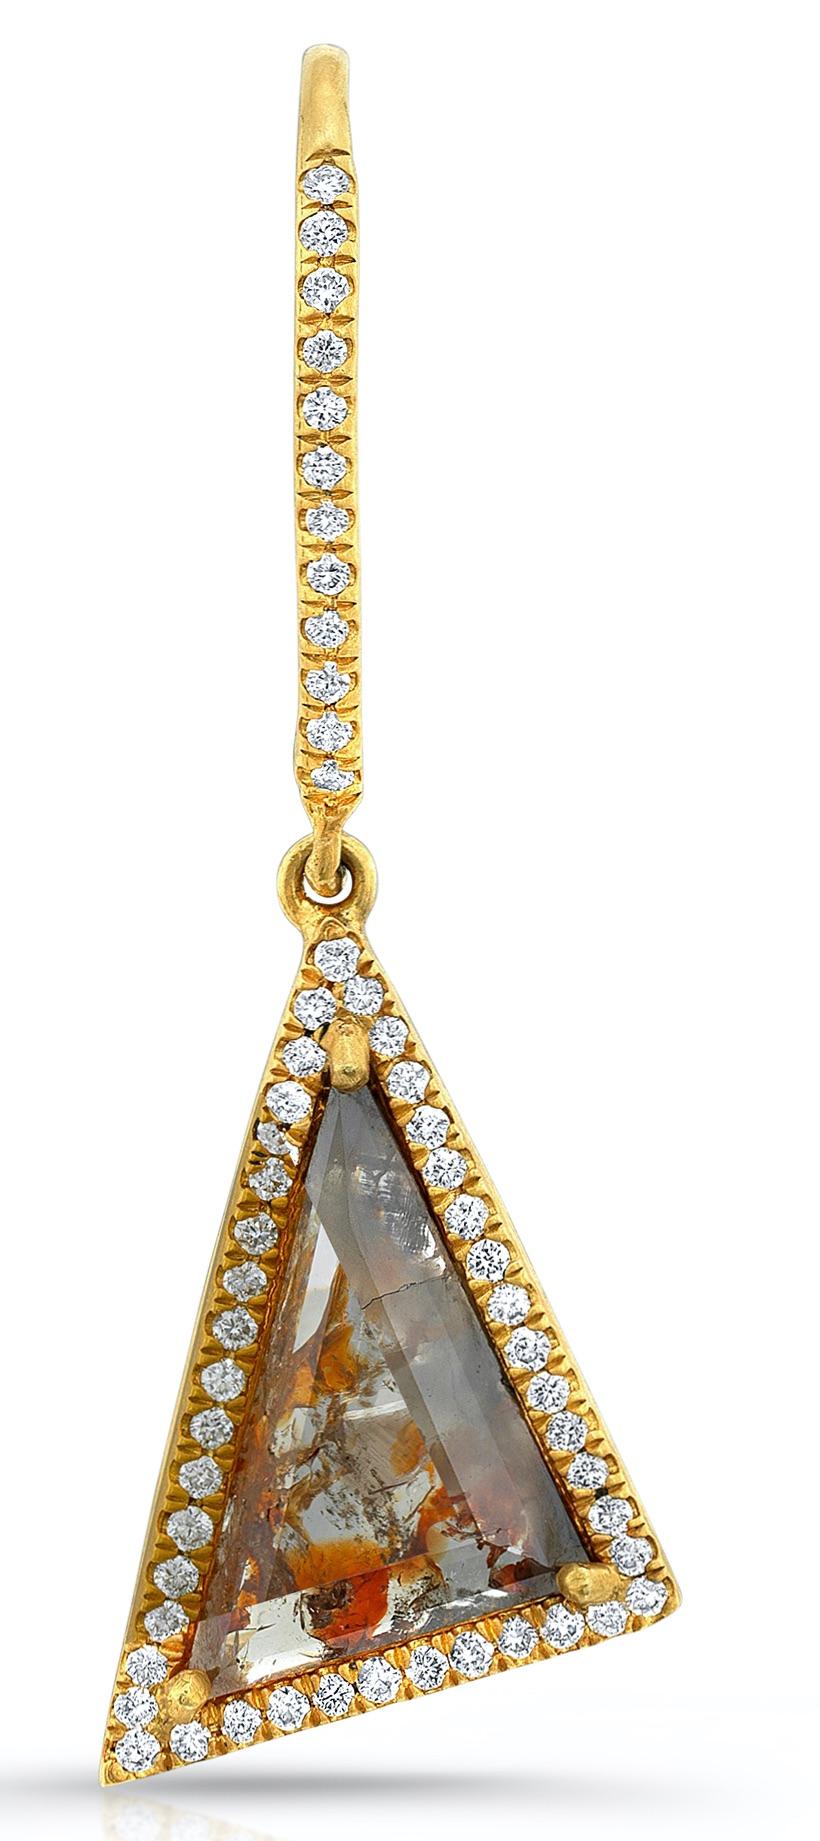 1.89ct. Red and Clear Scaline shaped Portrait Cut Diamond Slices with .44ct vs quality Diamond Pave in 18k Matte Finish  Yellow Gold. All gold work is handmade and set in Los Angeles.  All Diamonds are ethically sourced.